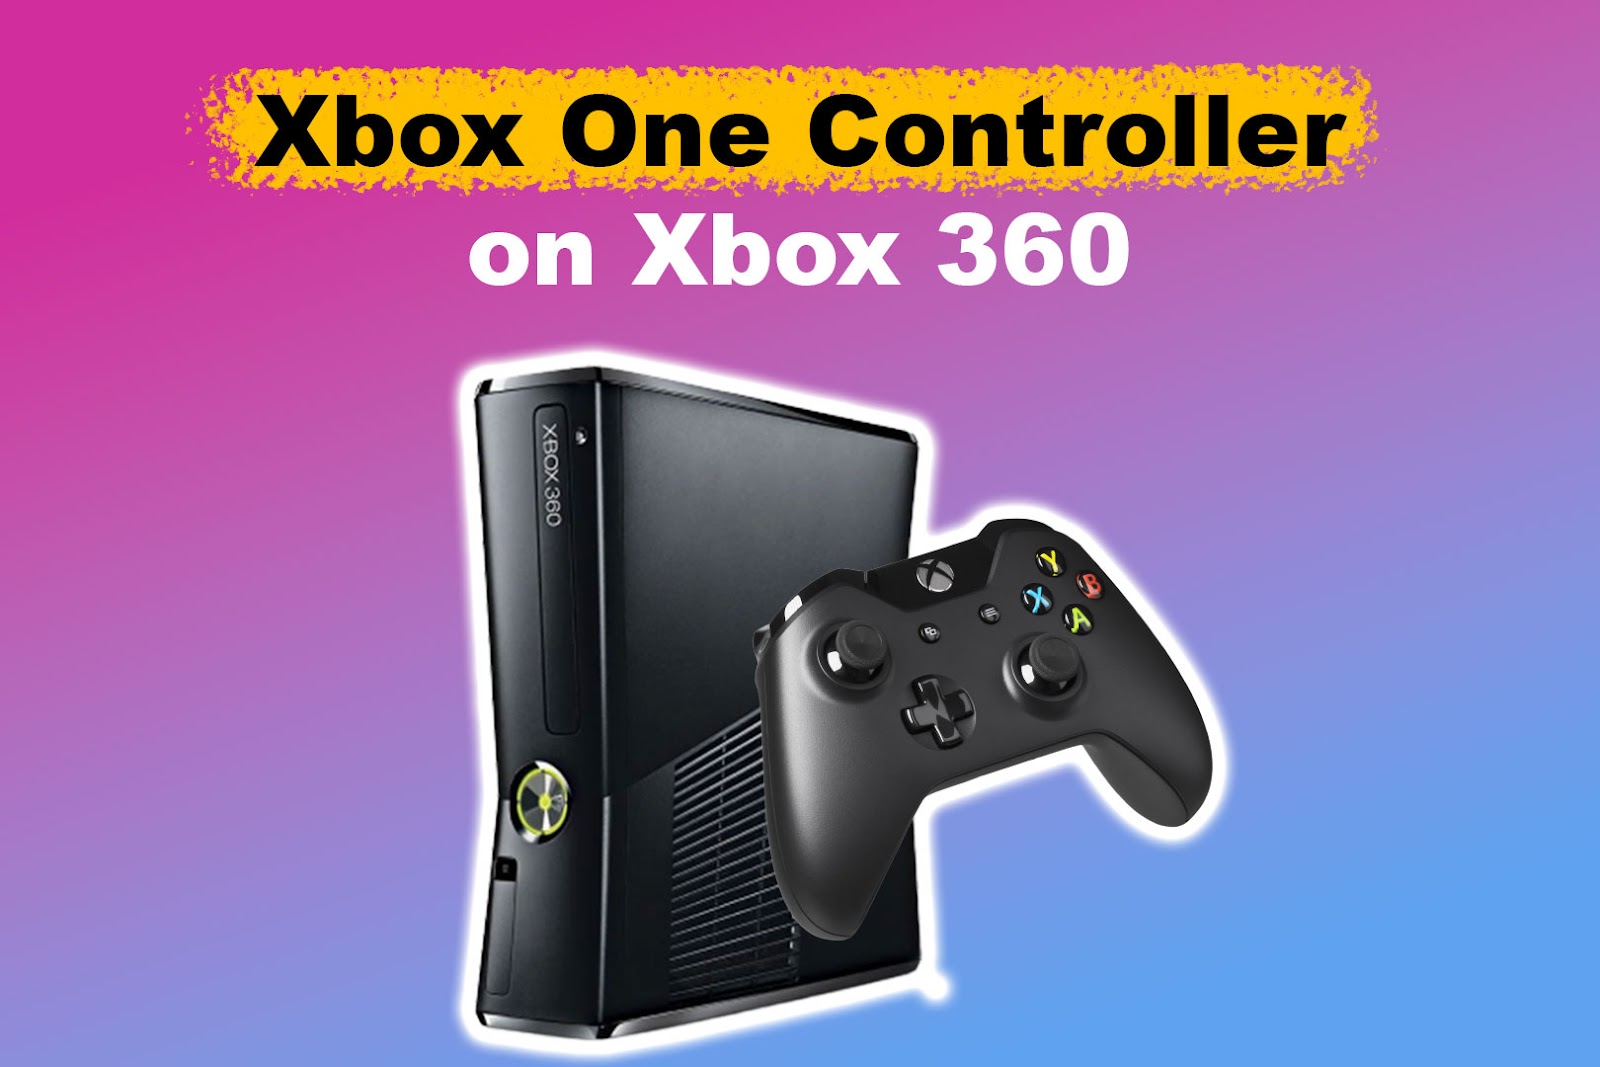 Using an Xbox One Controller on Xbox 360 [Will It Work?]